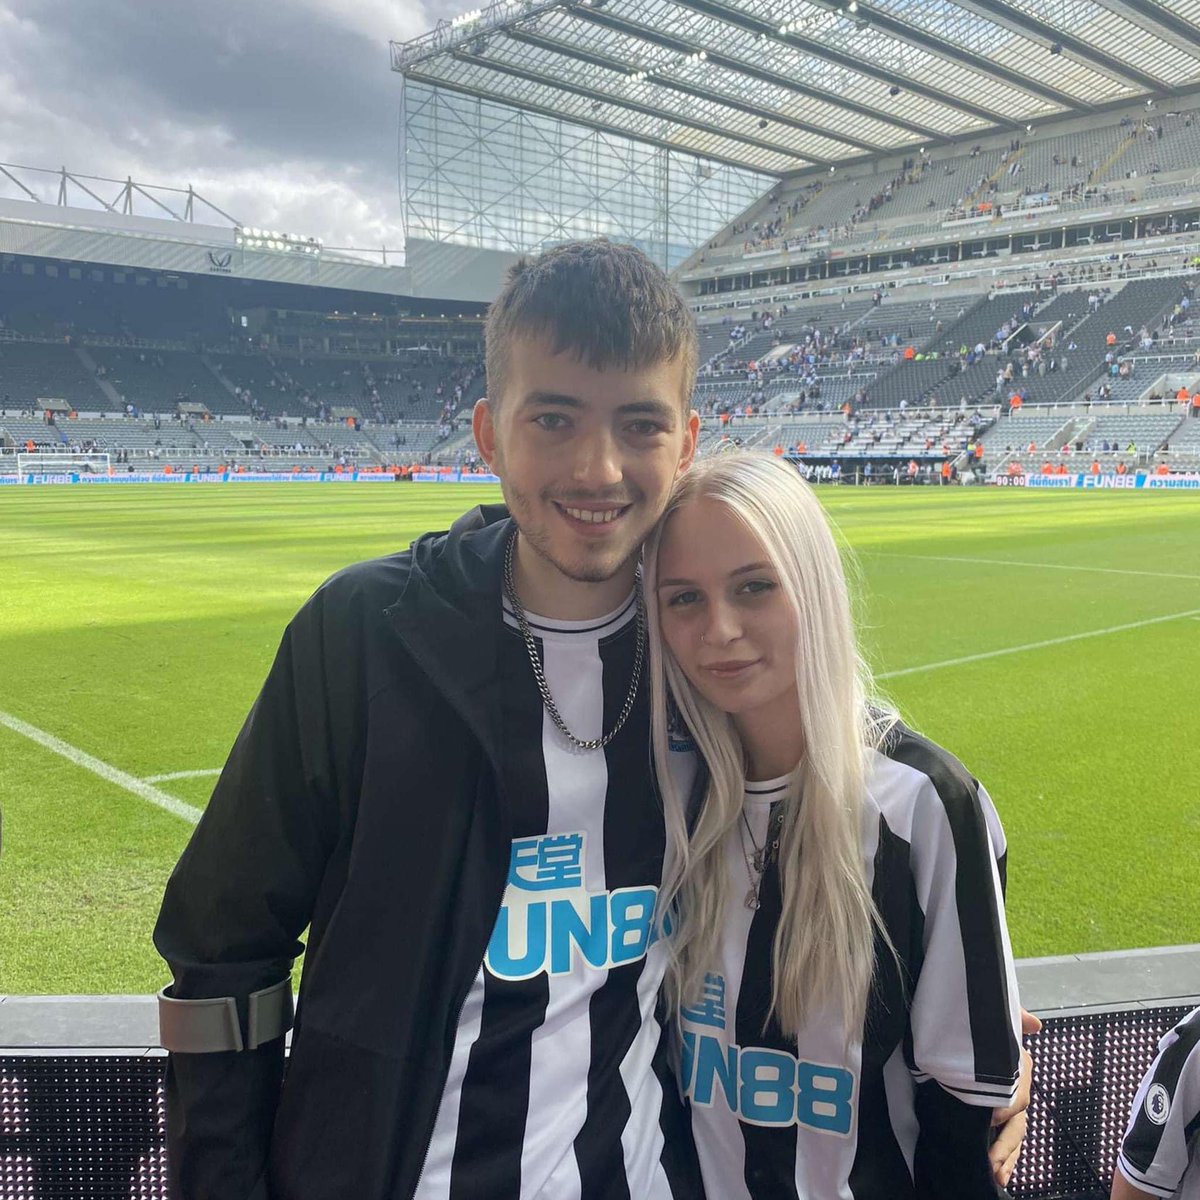 We want to try and pay tribute to Kai who tragically died this morning. Please could you stand and clap on the 22nd minute next week at our home game against Sheffield United. Please share or tag anyone who will be at the game. #nufc